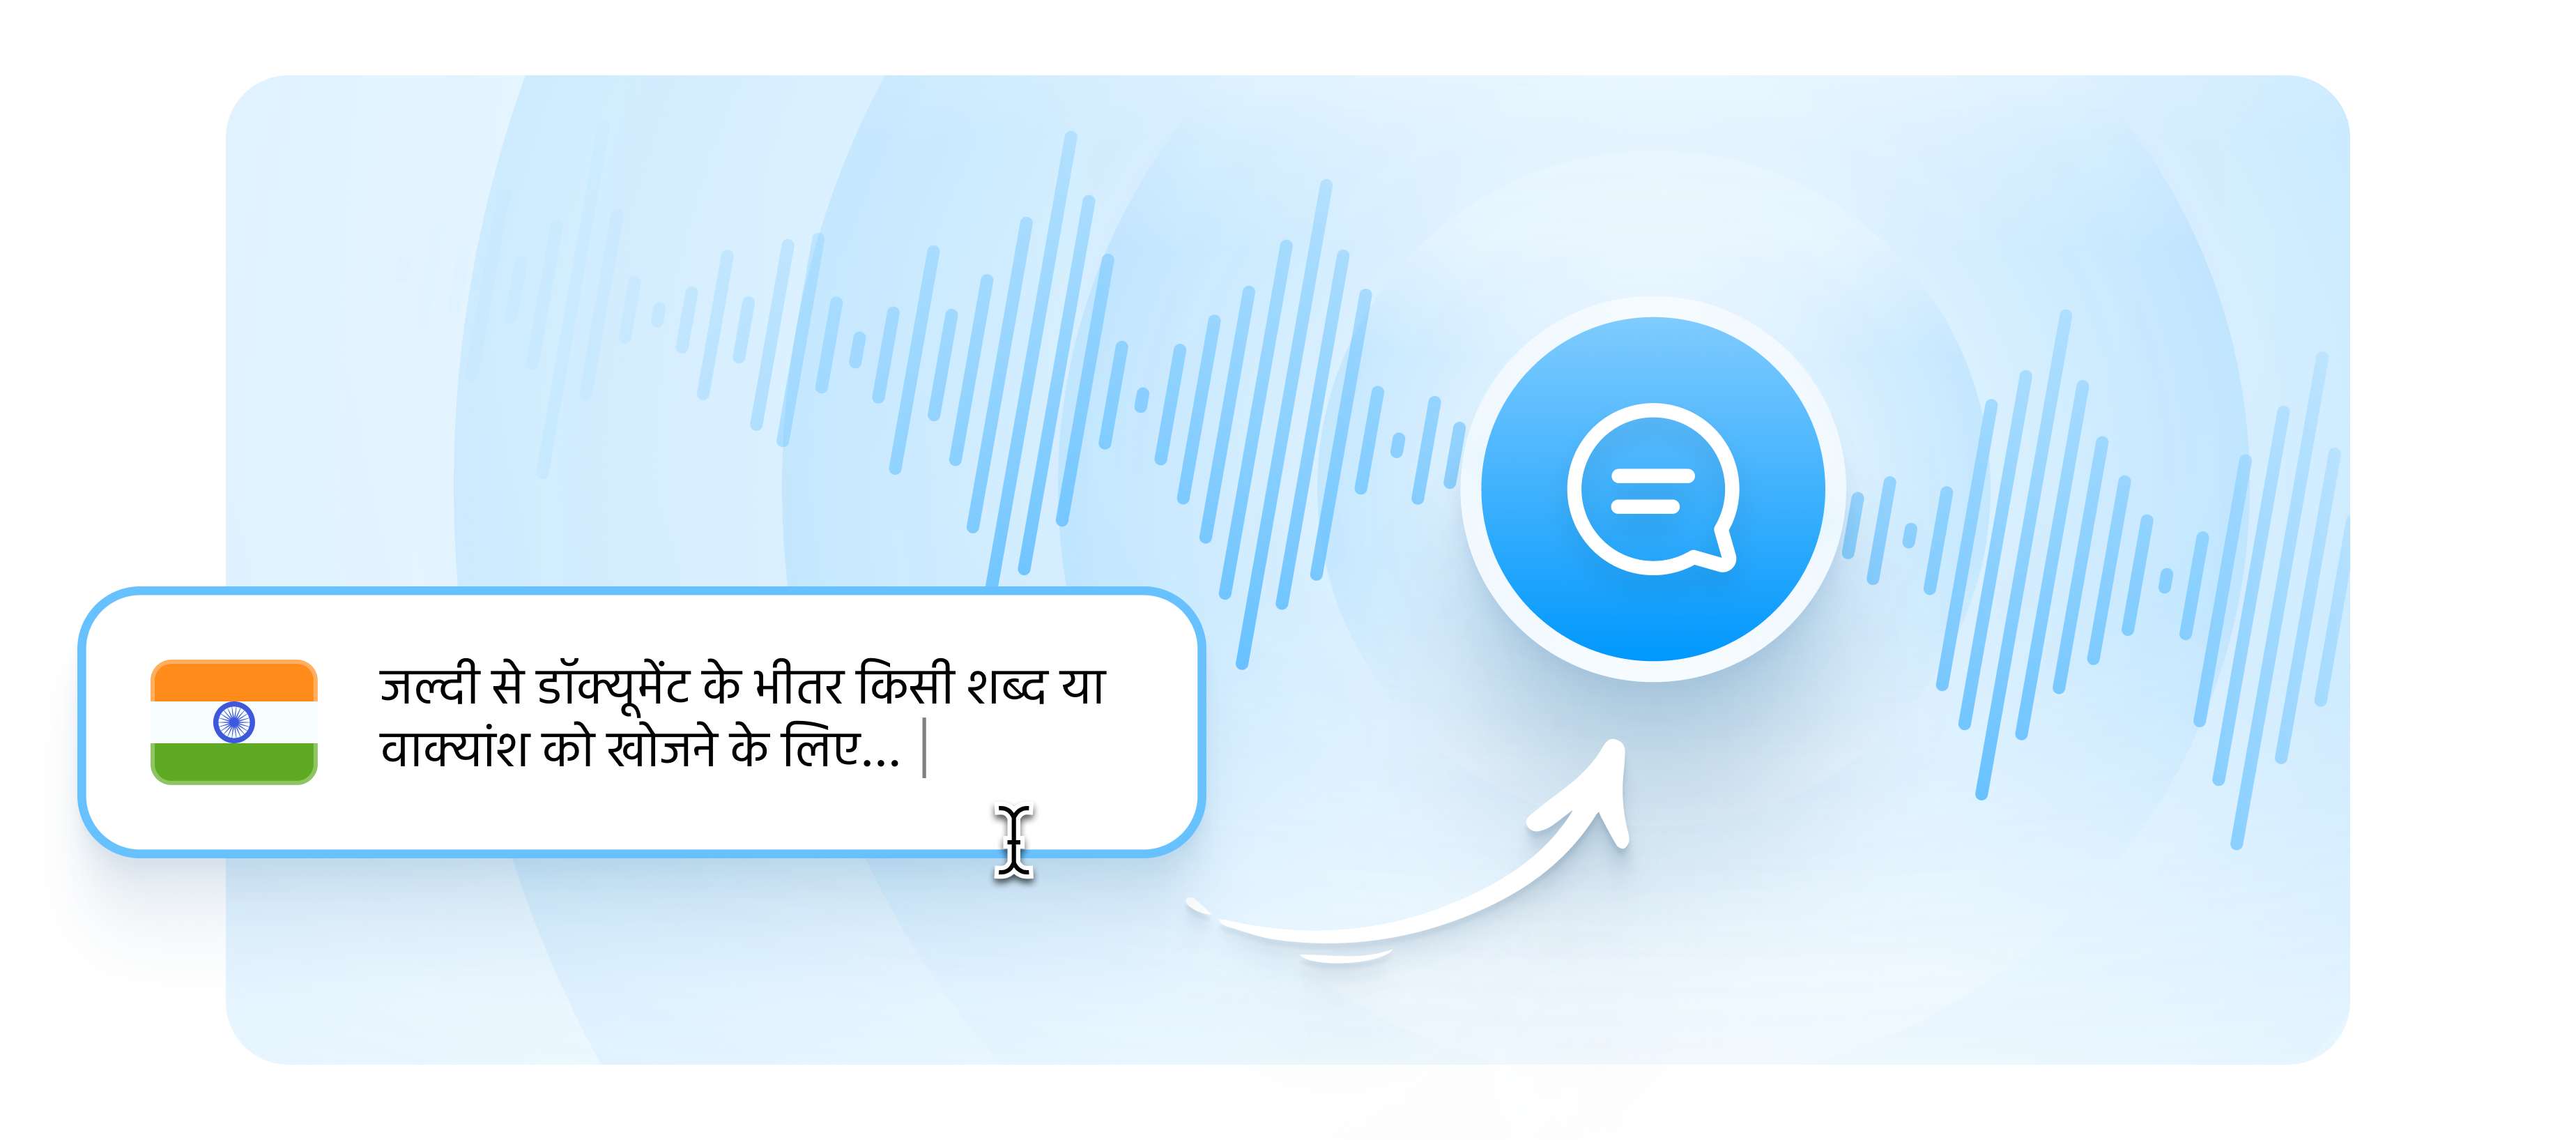 hindi text to speech software indian voice